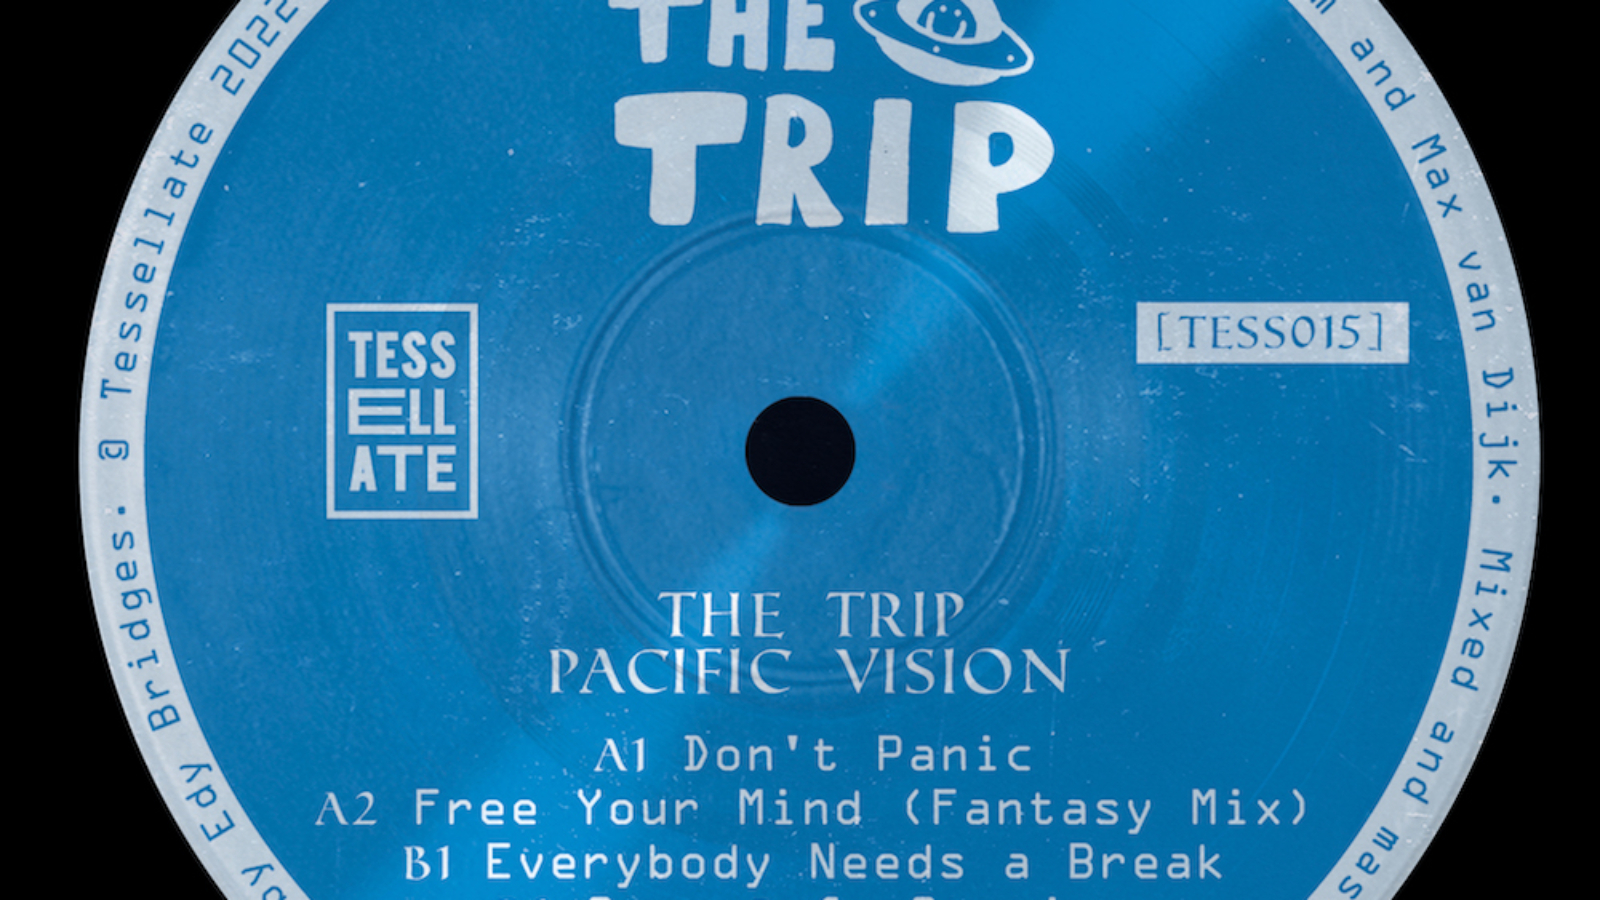 PACKSHOT The Trip - Pacific Vision - Tessellate